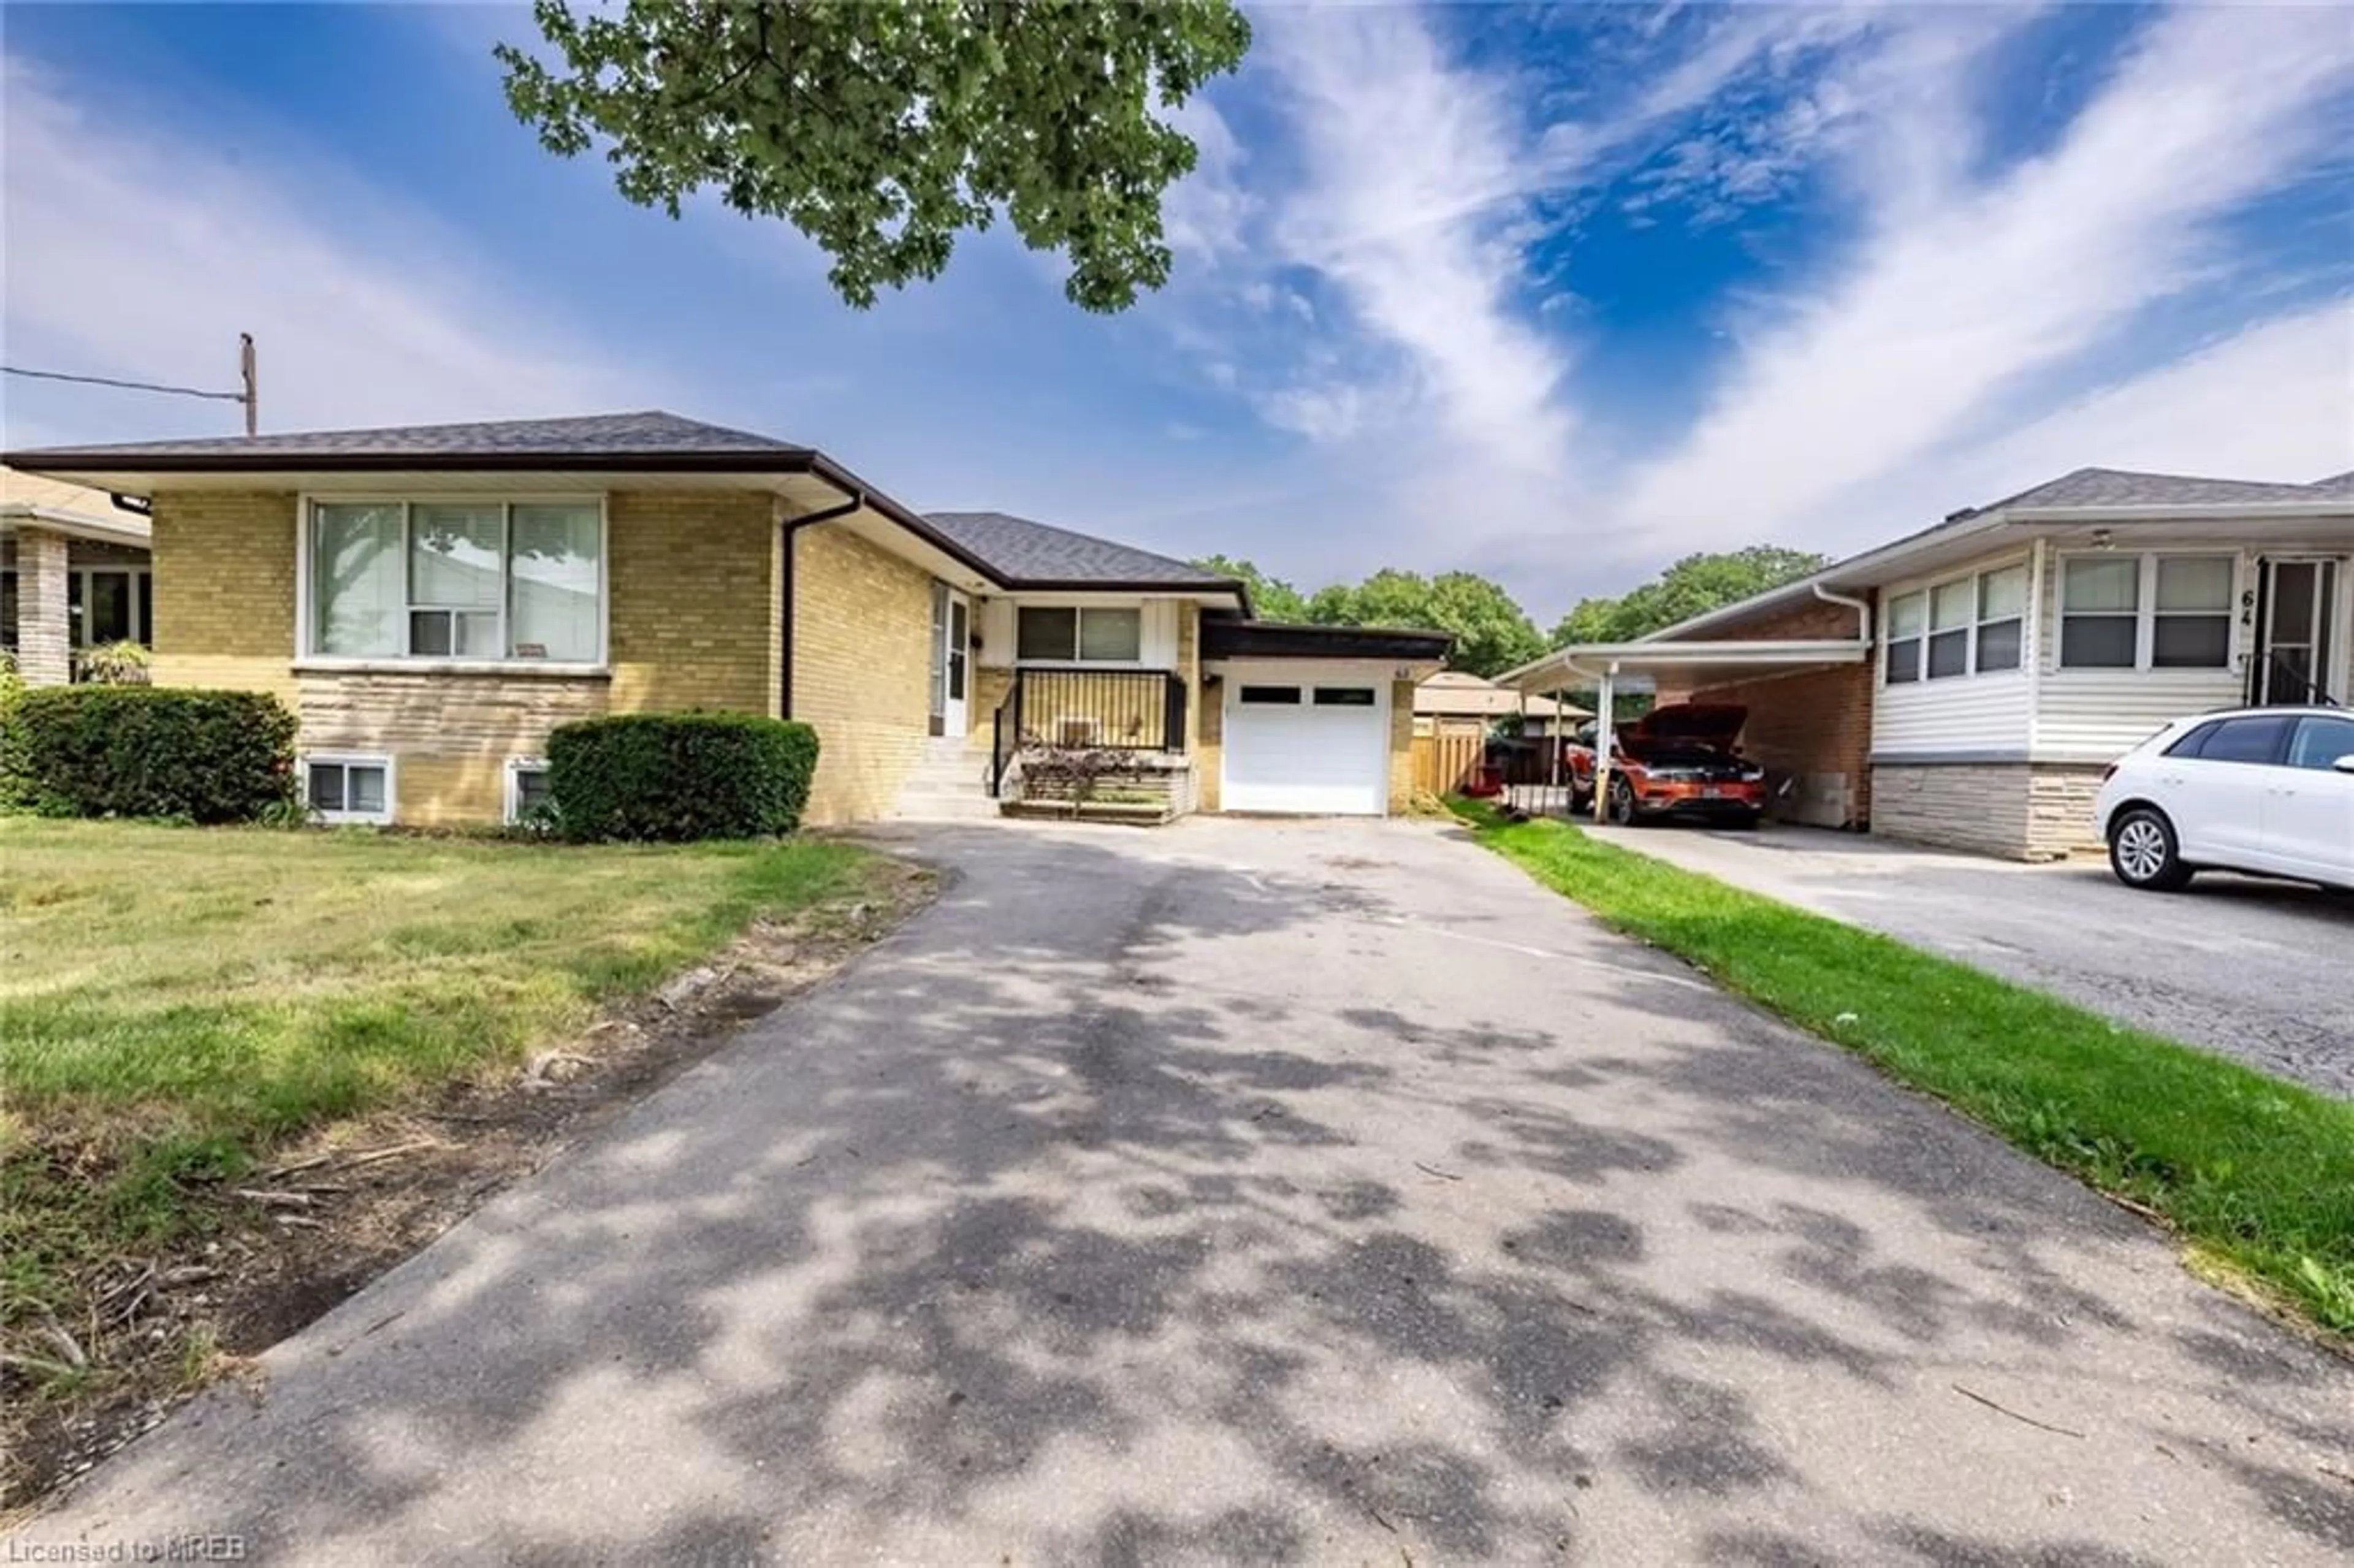 Frontside or backside of a home for 62 Ludstone Dr, Toronto Ontario M9R 2J3